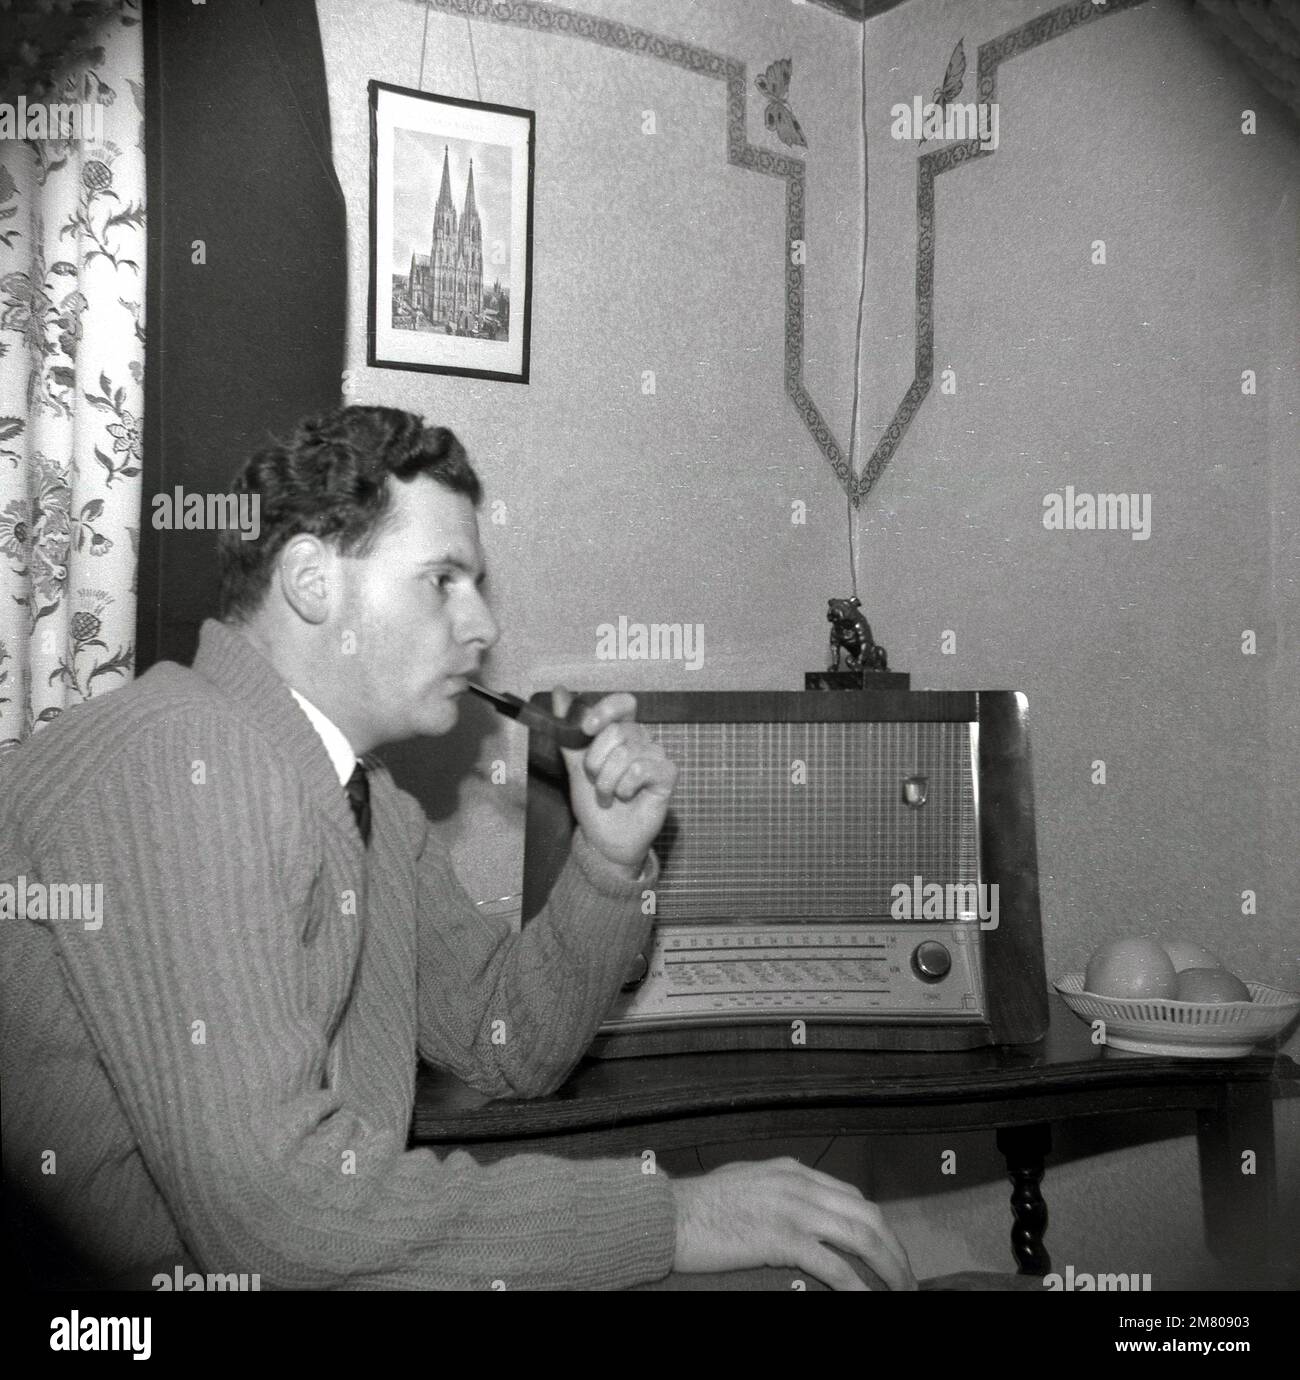 1950s-historical-a-man-sitting-in-a-room-at-home-smoking-his-pipe-and-listening-to-a-large-radio-england-uk-2M80903.jpg